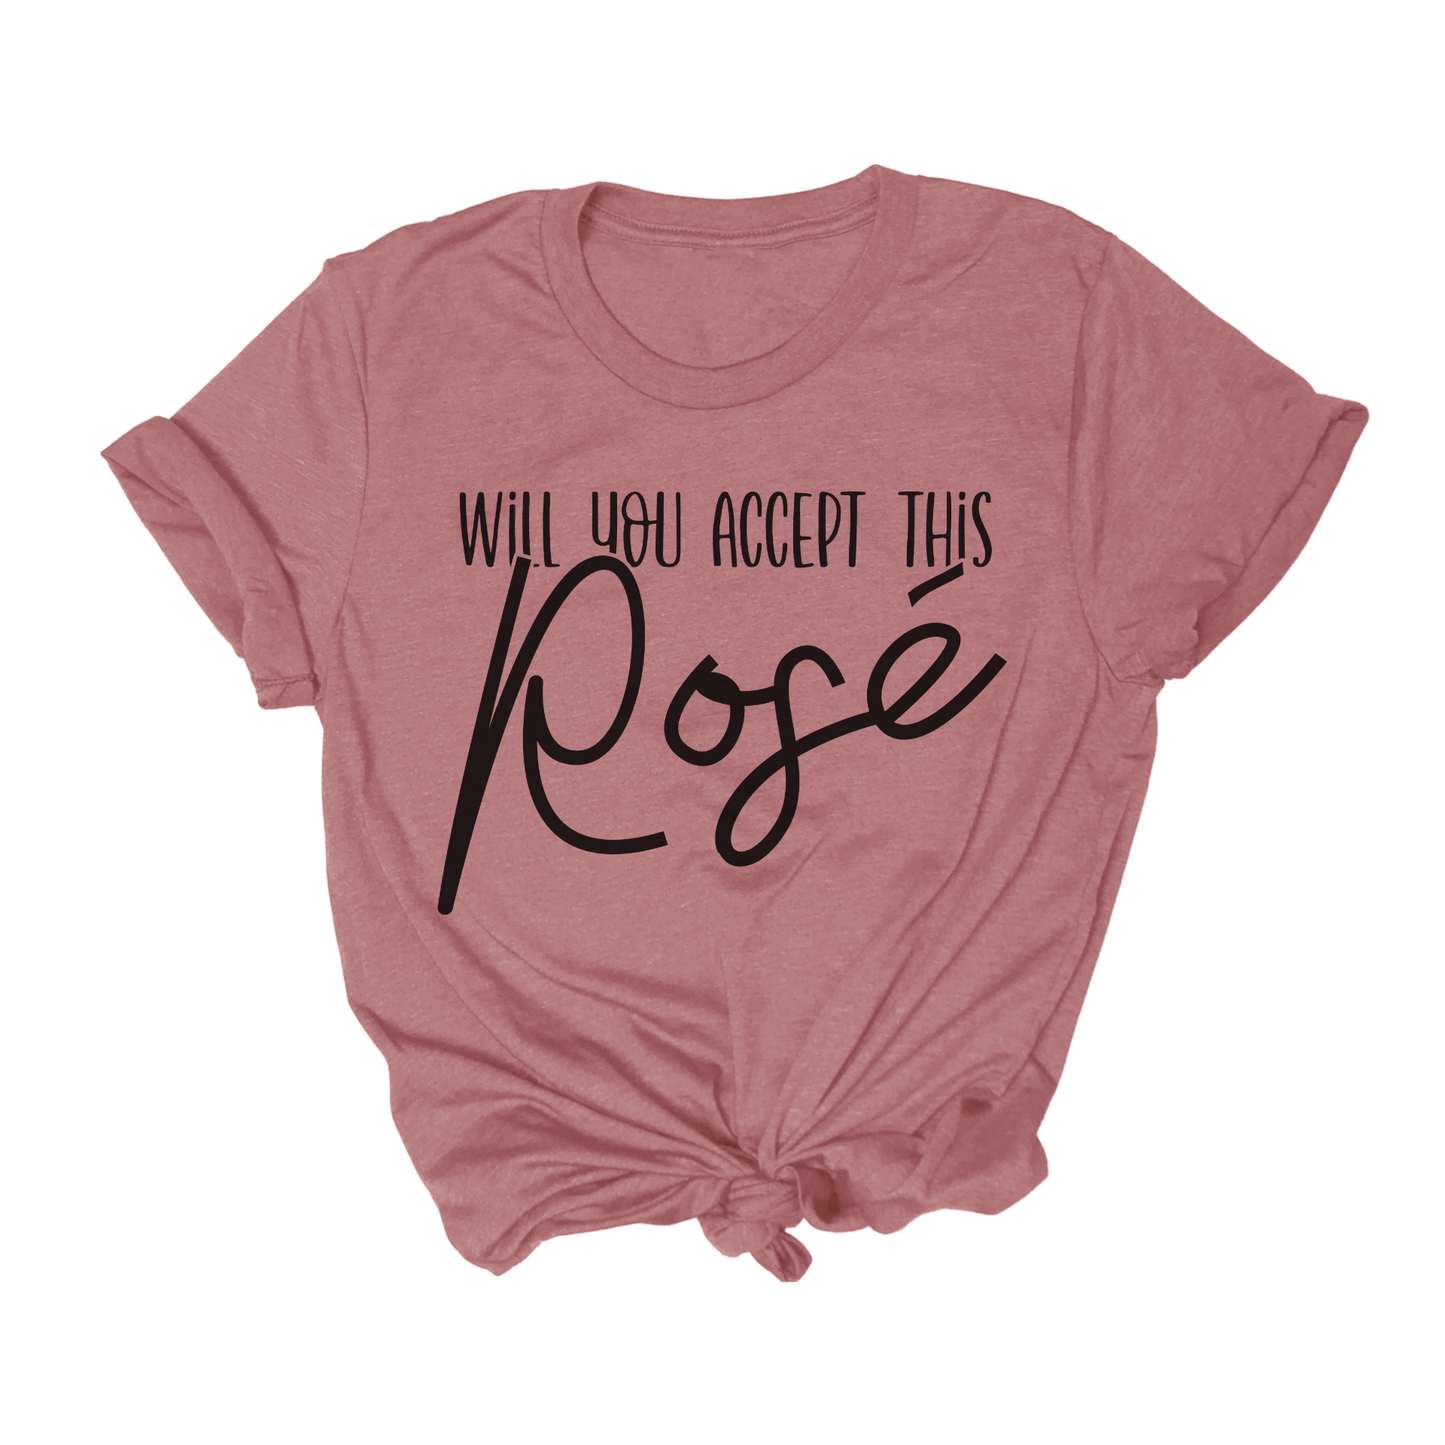 Will You Accept This Rosé Tee